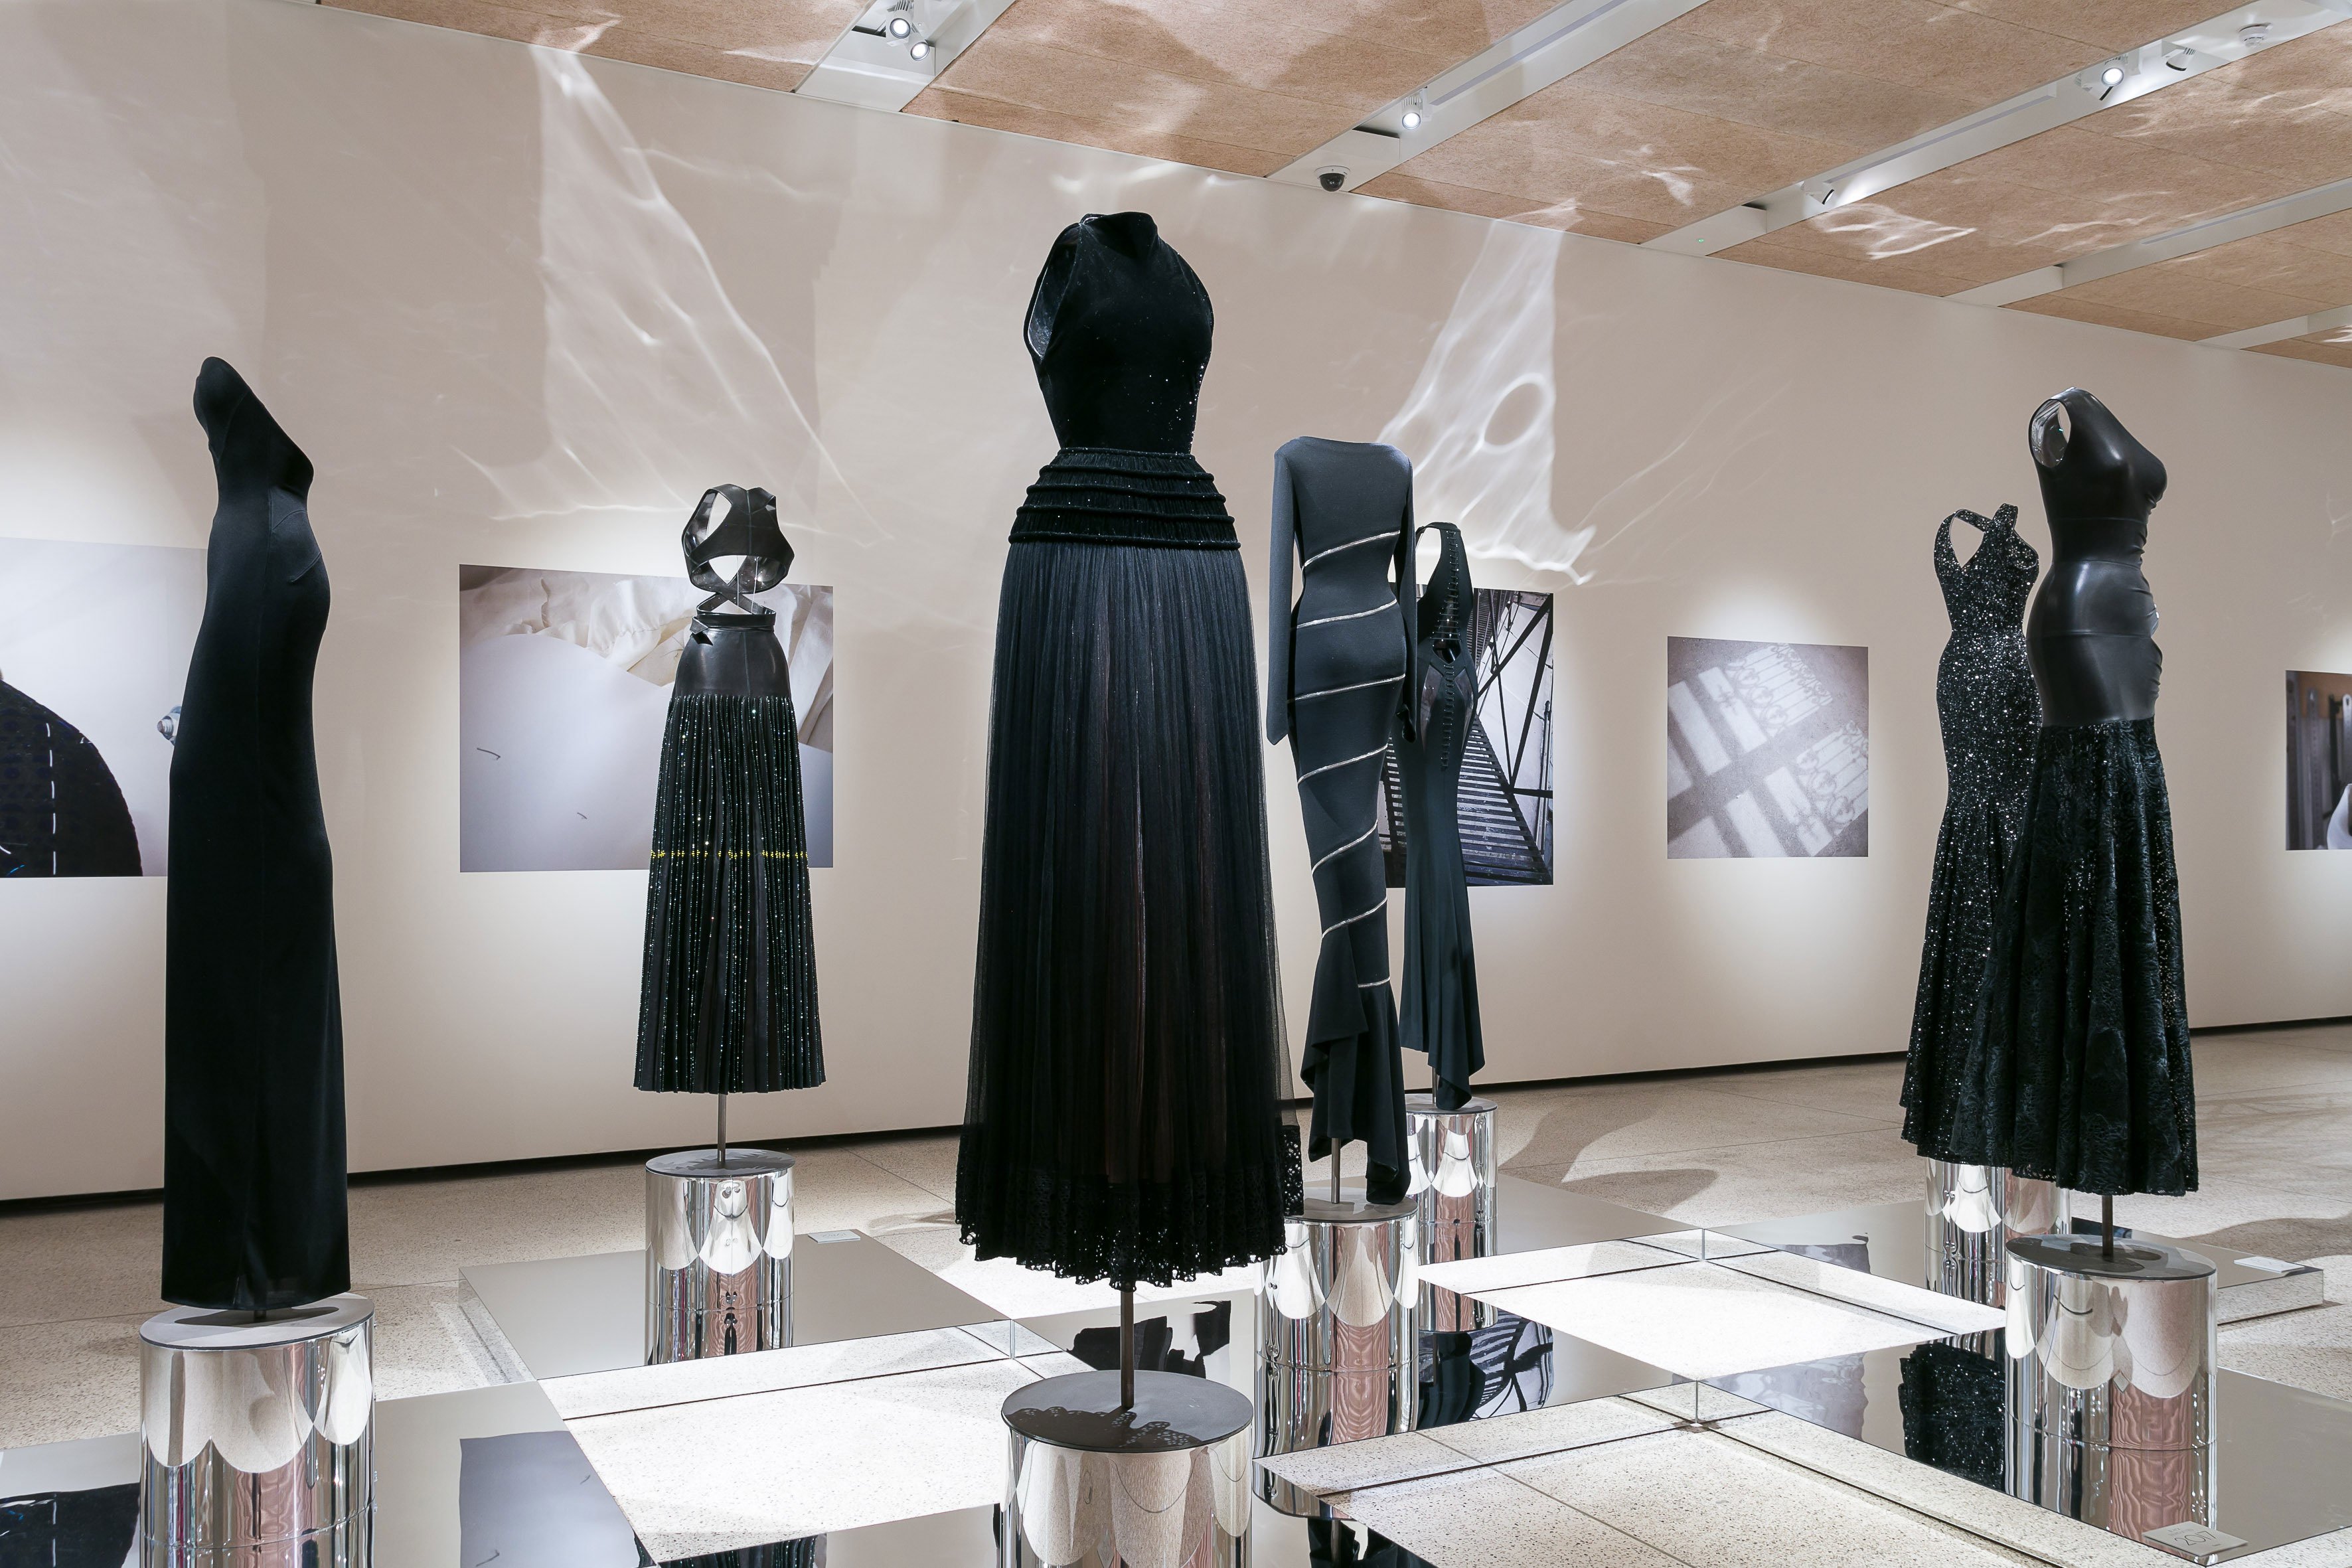 Installation of view of "Azzedine Alaïa: The Couturier" at the Design Museum. Photo by Mark Blower.